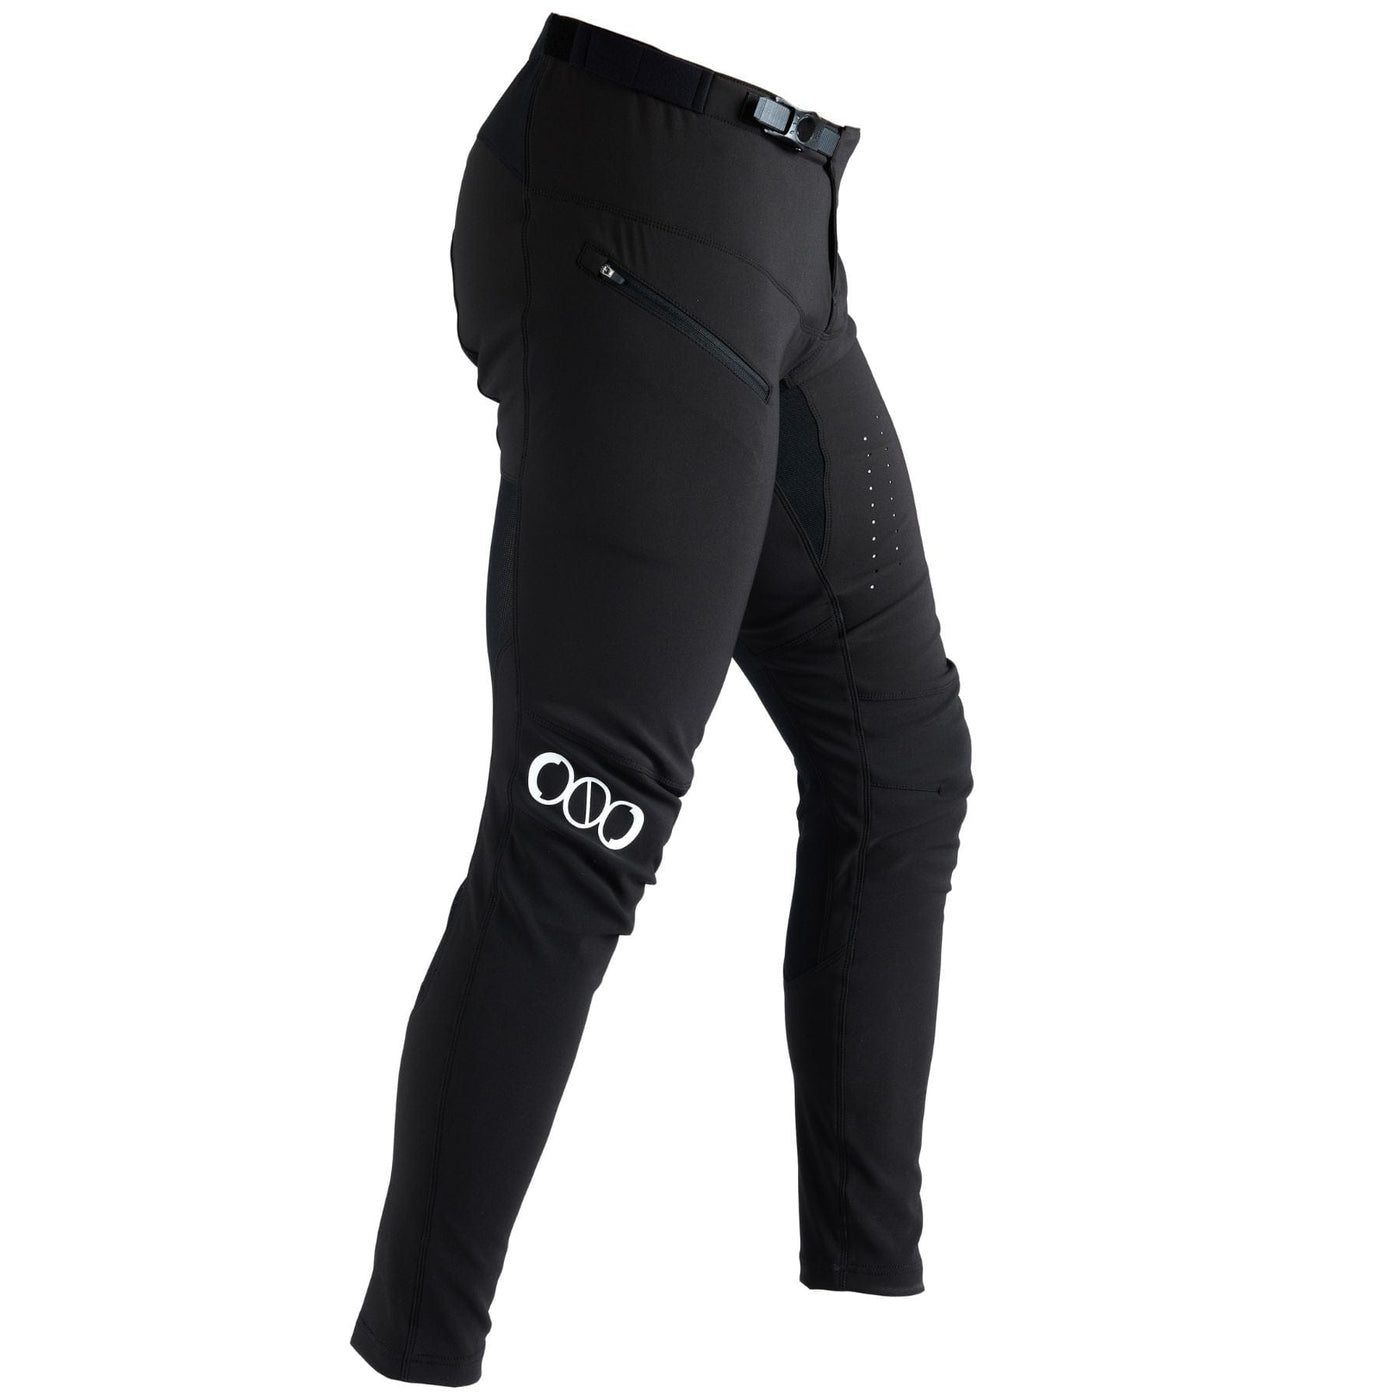 NoLogo Racer Youth BMX Pants - Black 8Lines Shop - Fast Shipping